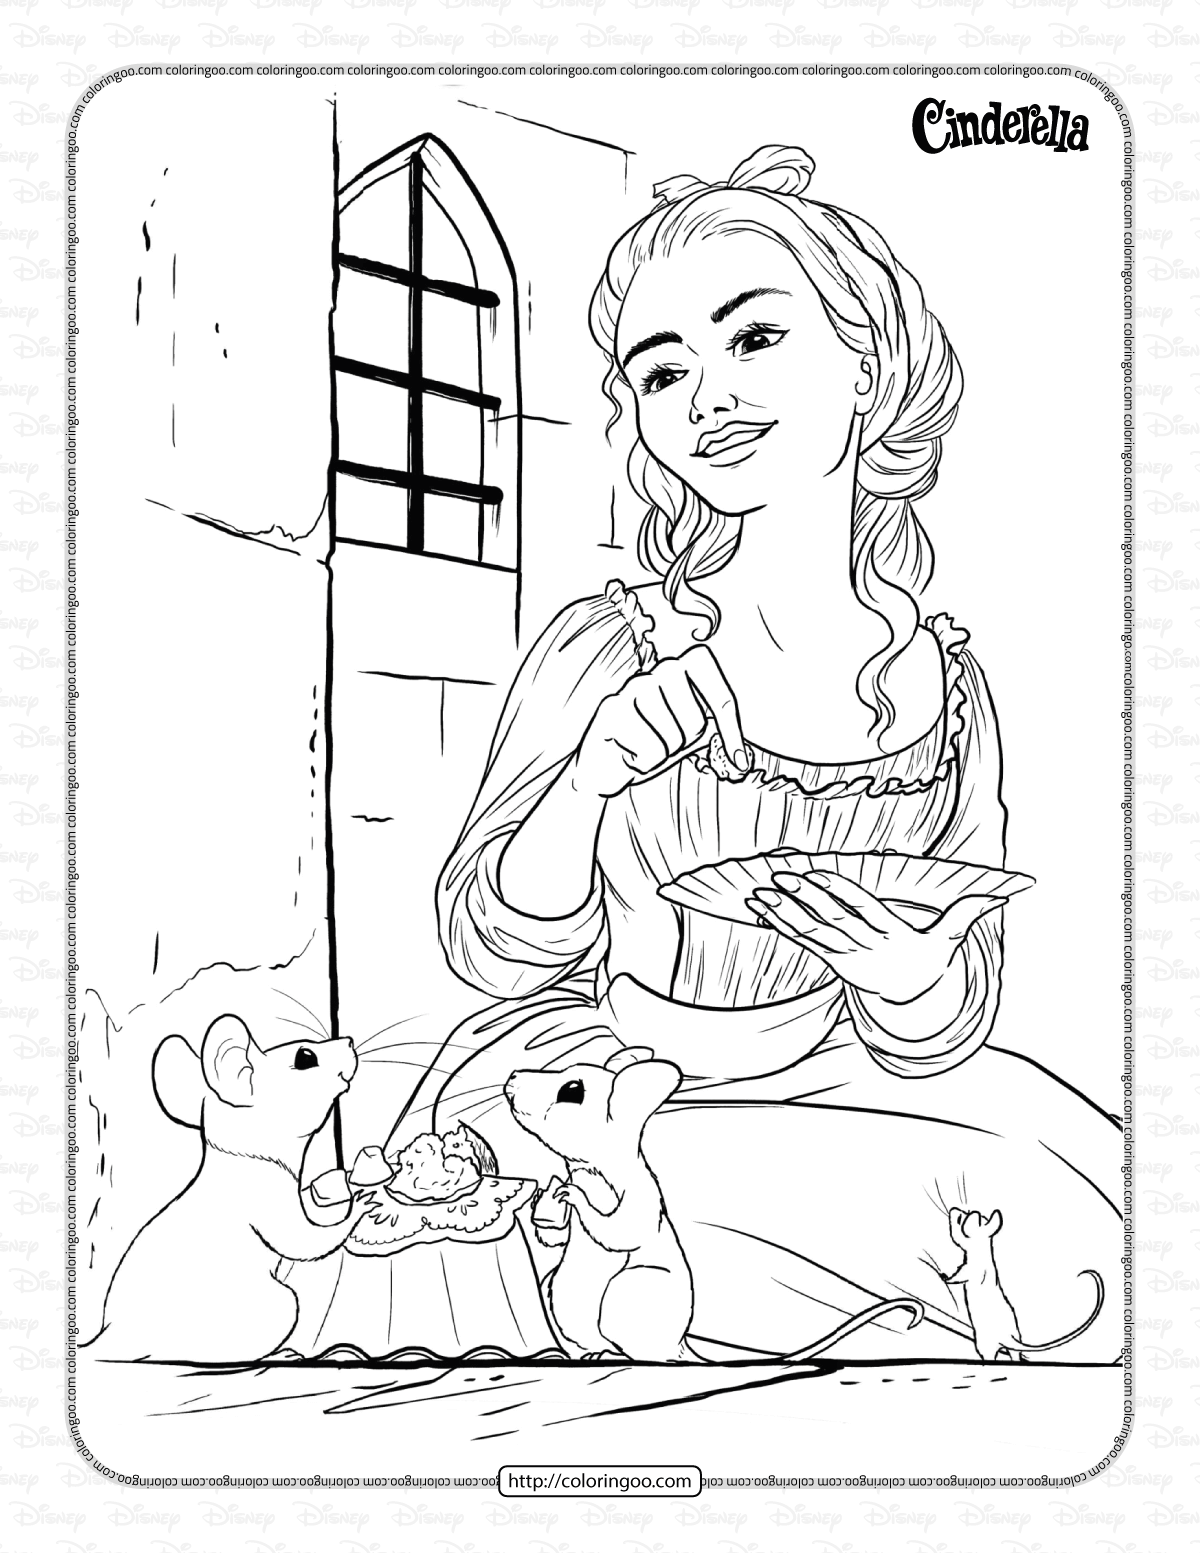 cinderella and her animal friends coloring sheet